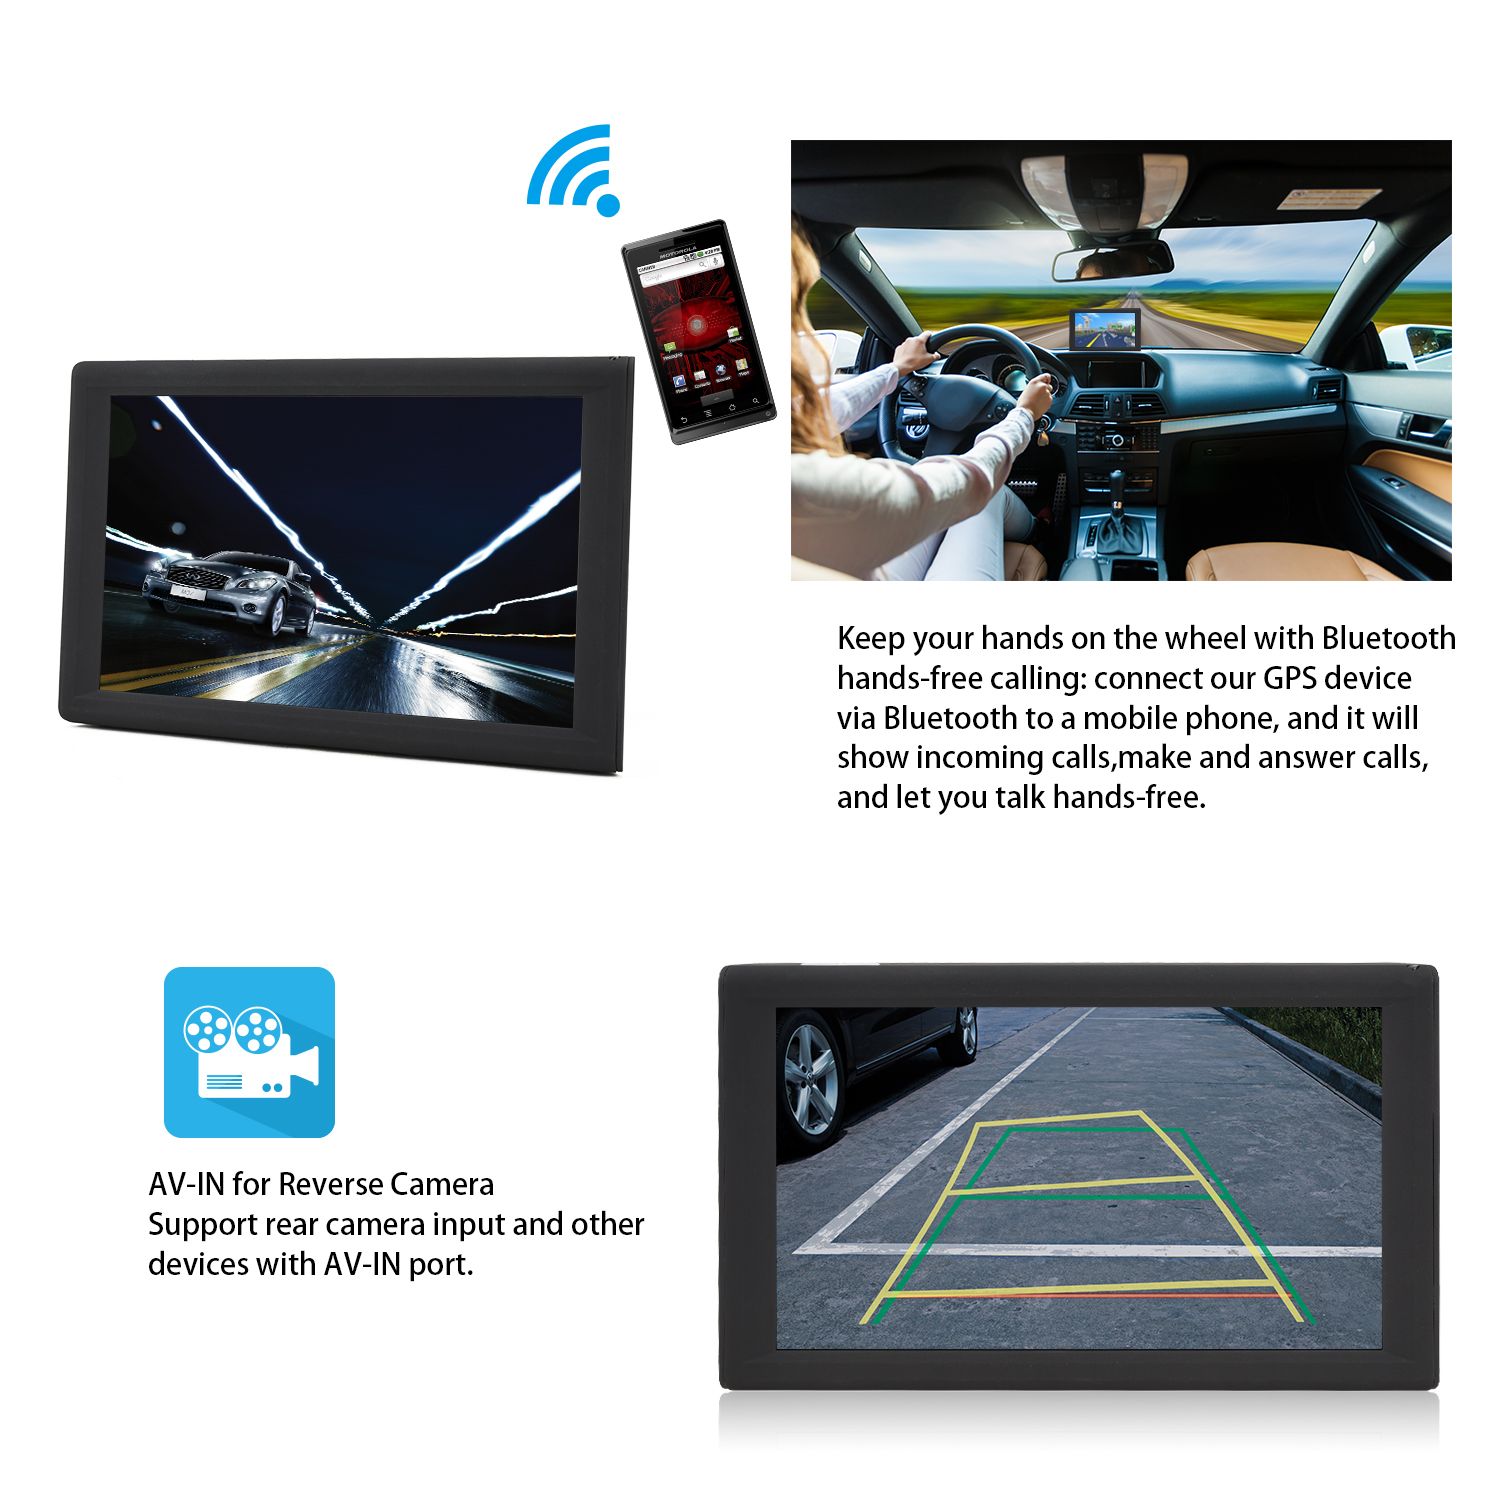 S900-Touch-Screen-WiFi-bluetooth-Handsfree-Mobile-Phone-Connection-MP3-Video-Play-FM-Car-GPS-Navigat-1563869